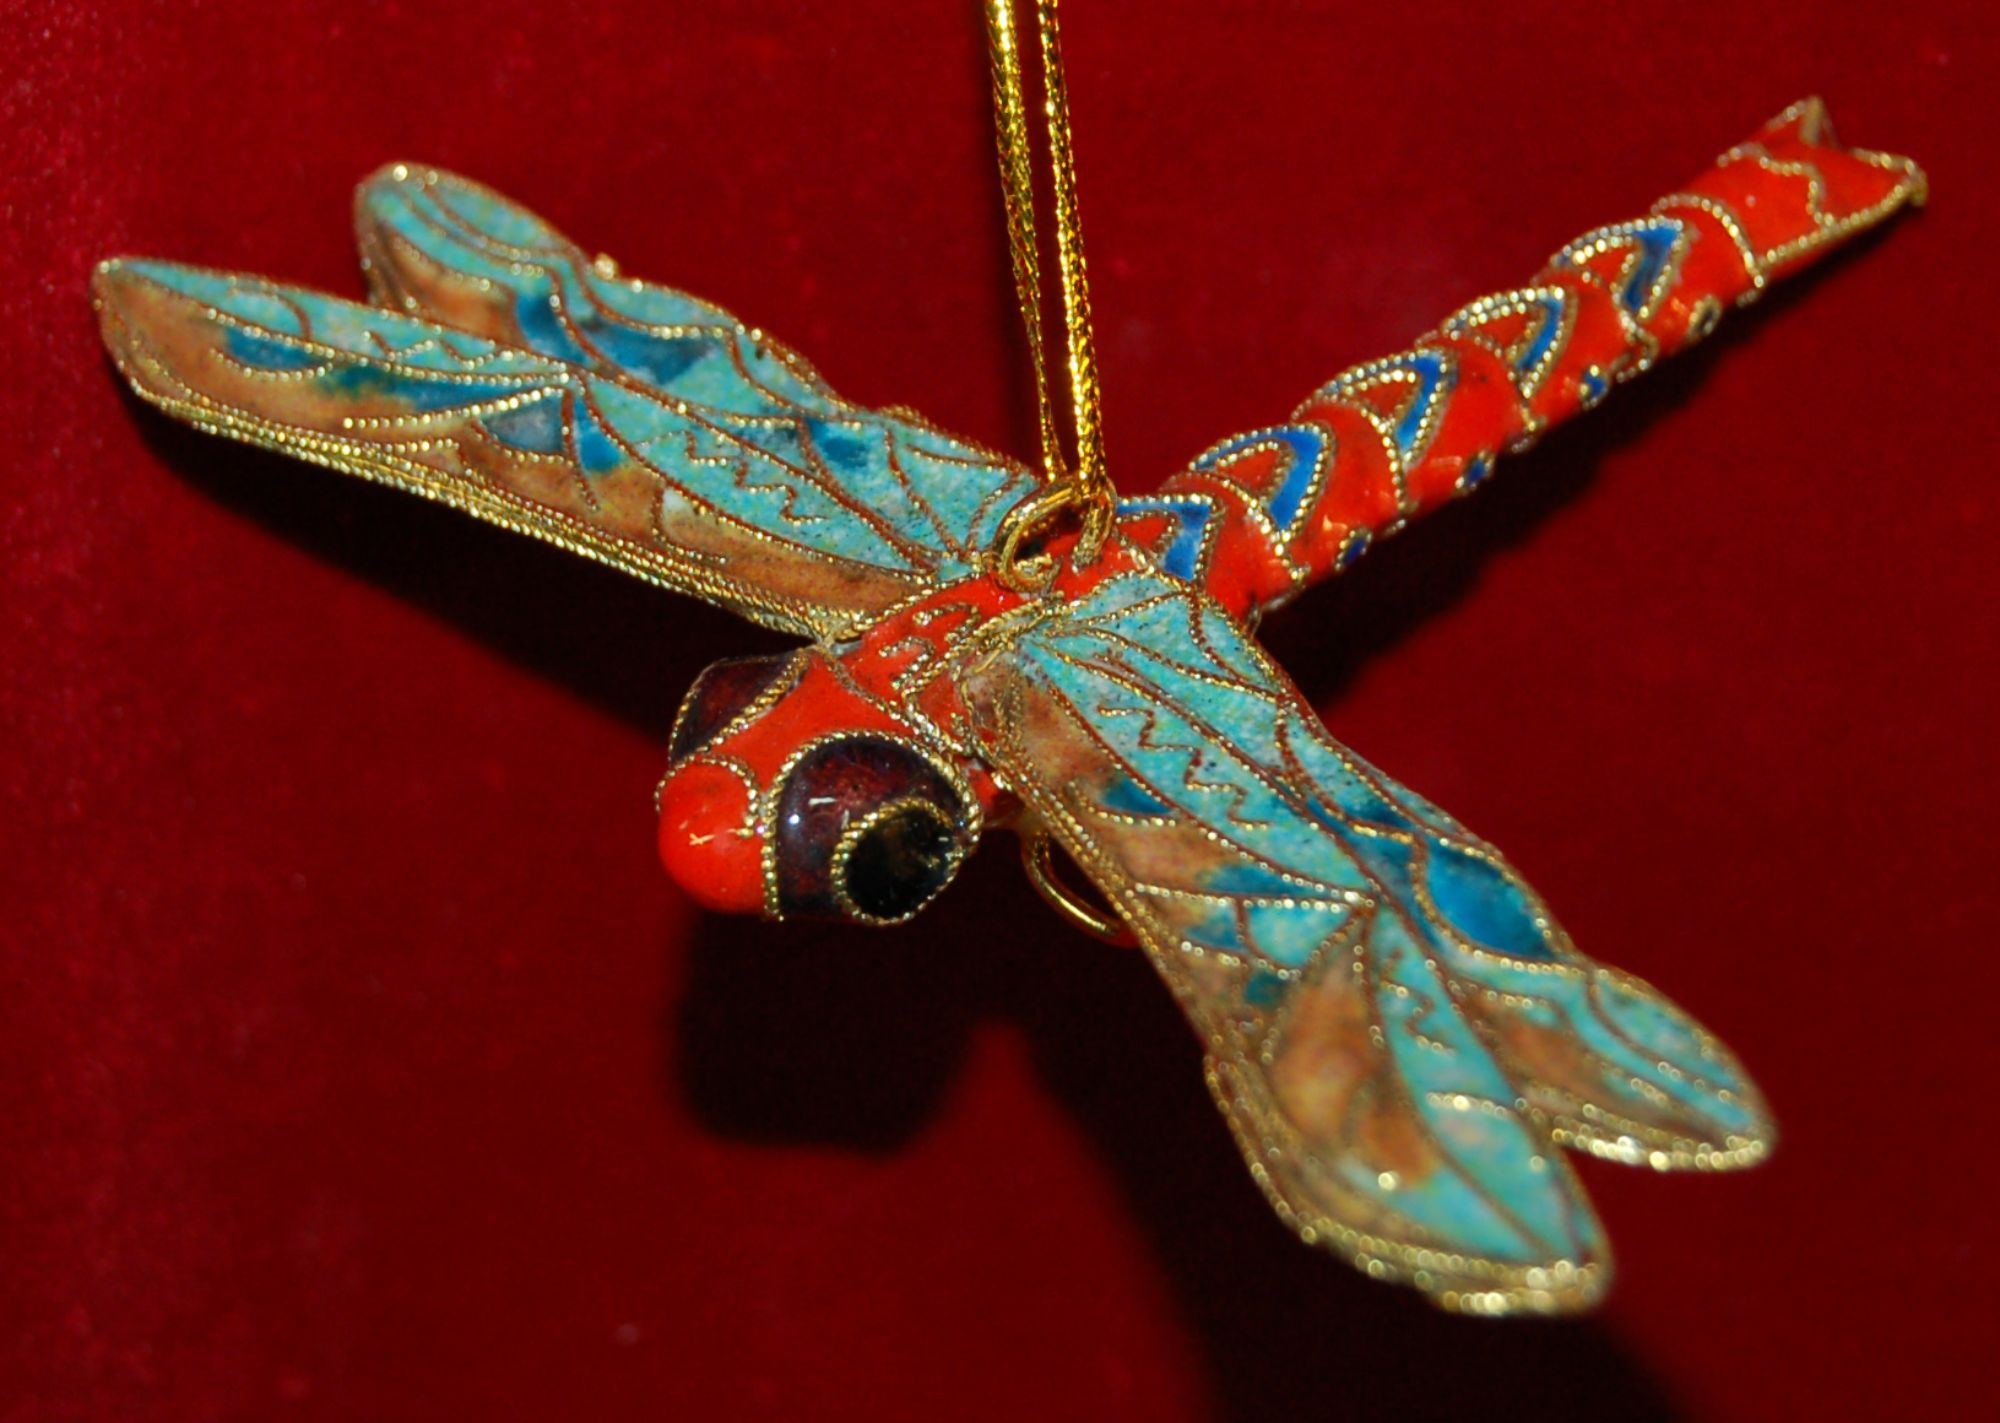 Dragonfly Christmas Ornament Cloisonne Orange Personalized by RussellRhodes.com